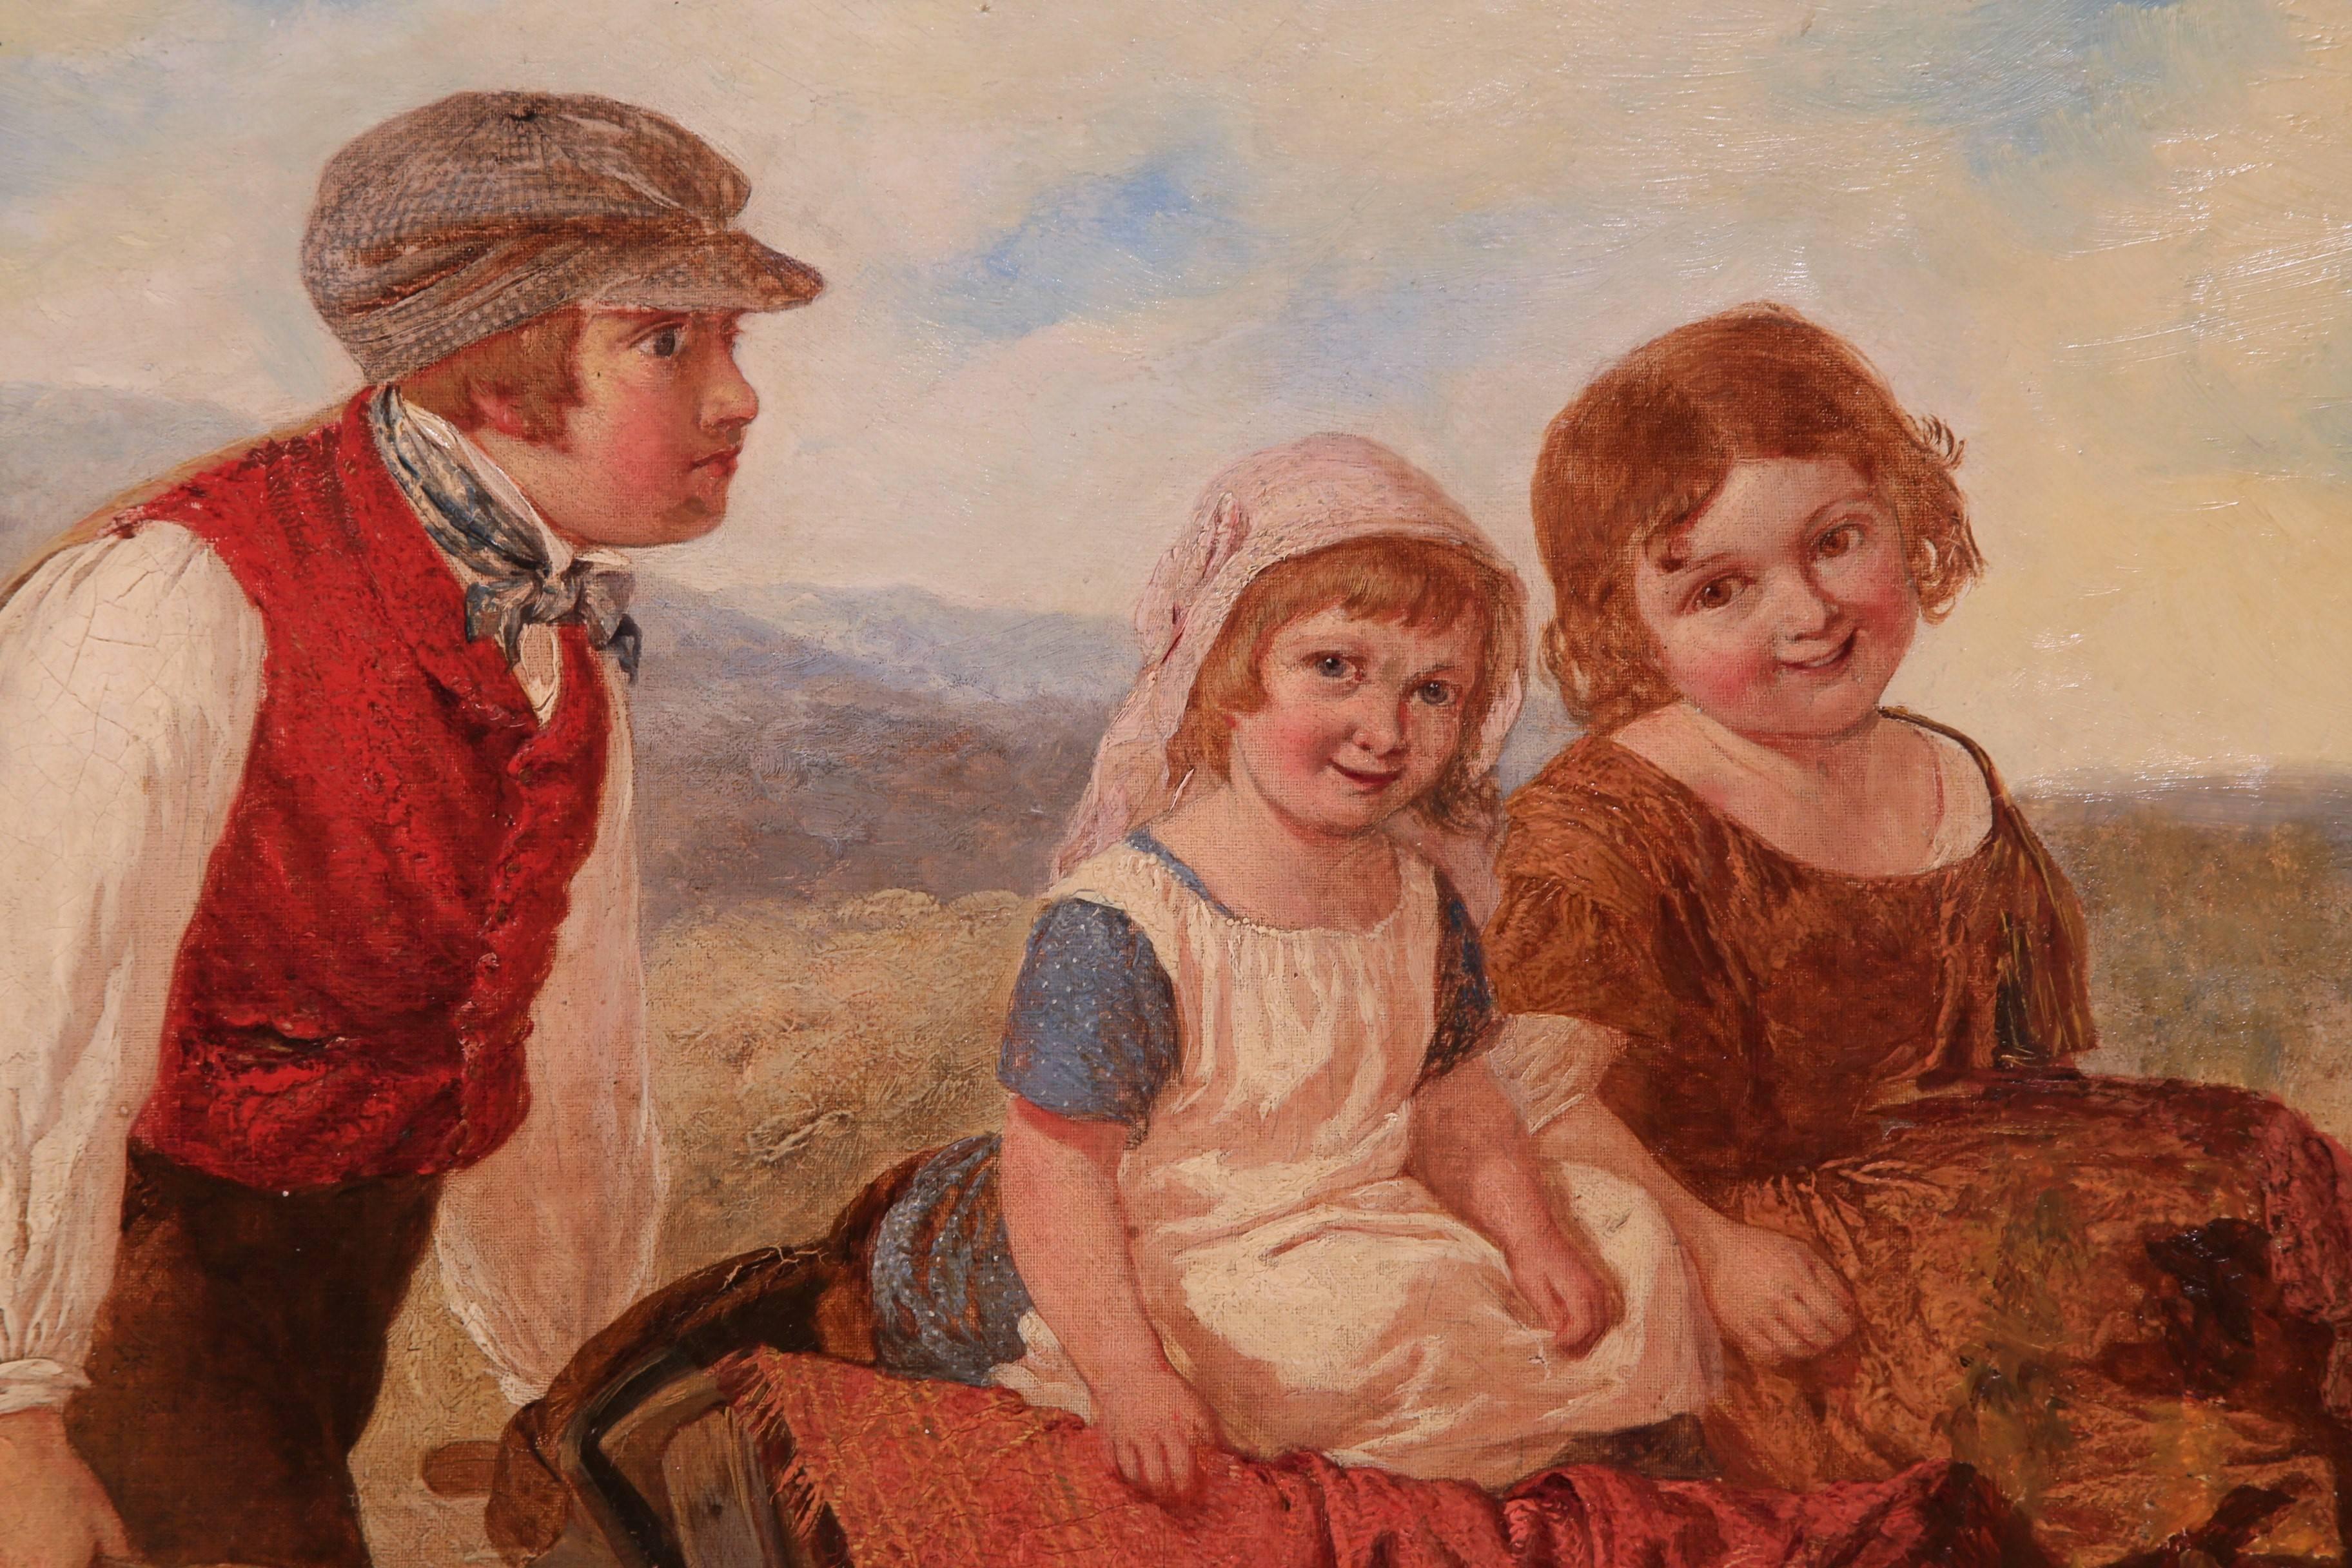 This fine antique painting from England is a bucolic scene that features three children in the countryside riding in a wheelbarrow. Painted circa 1860, the piece has a wonderful color palette, and figures with expressive faces. The painting is set